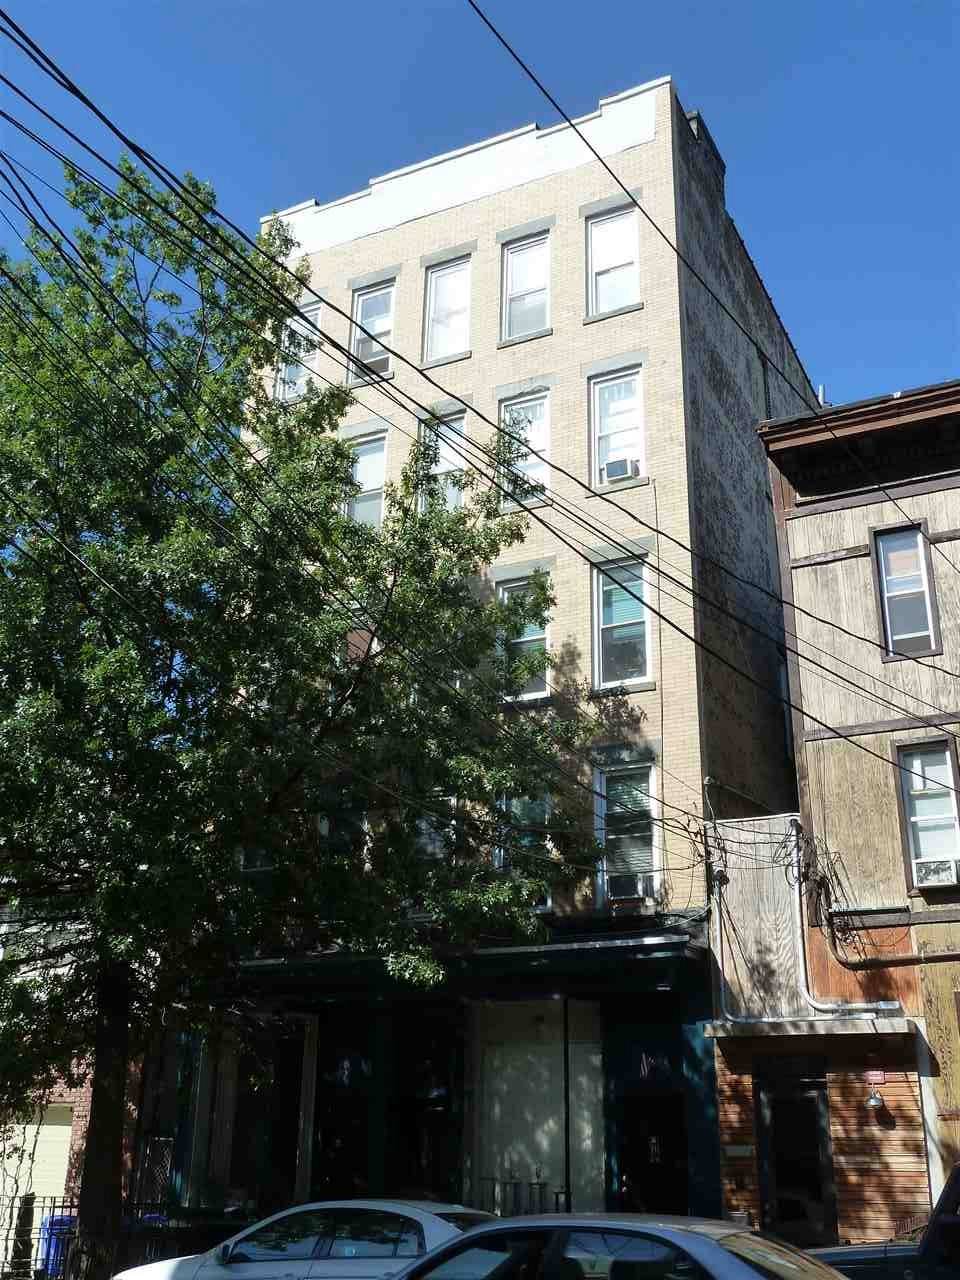 Sunny One Bedroom Apartment - 1 BR New Jersey